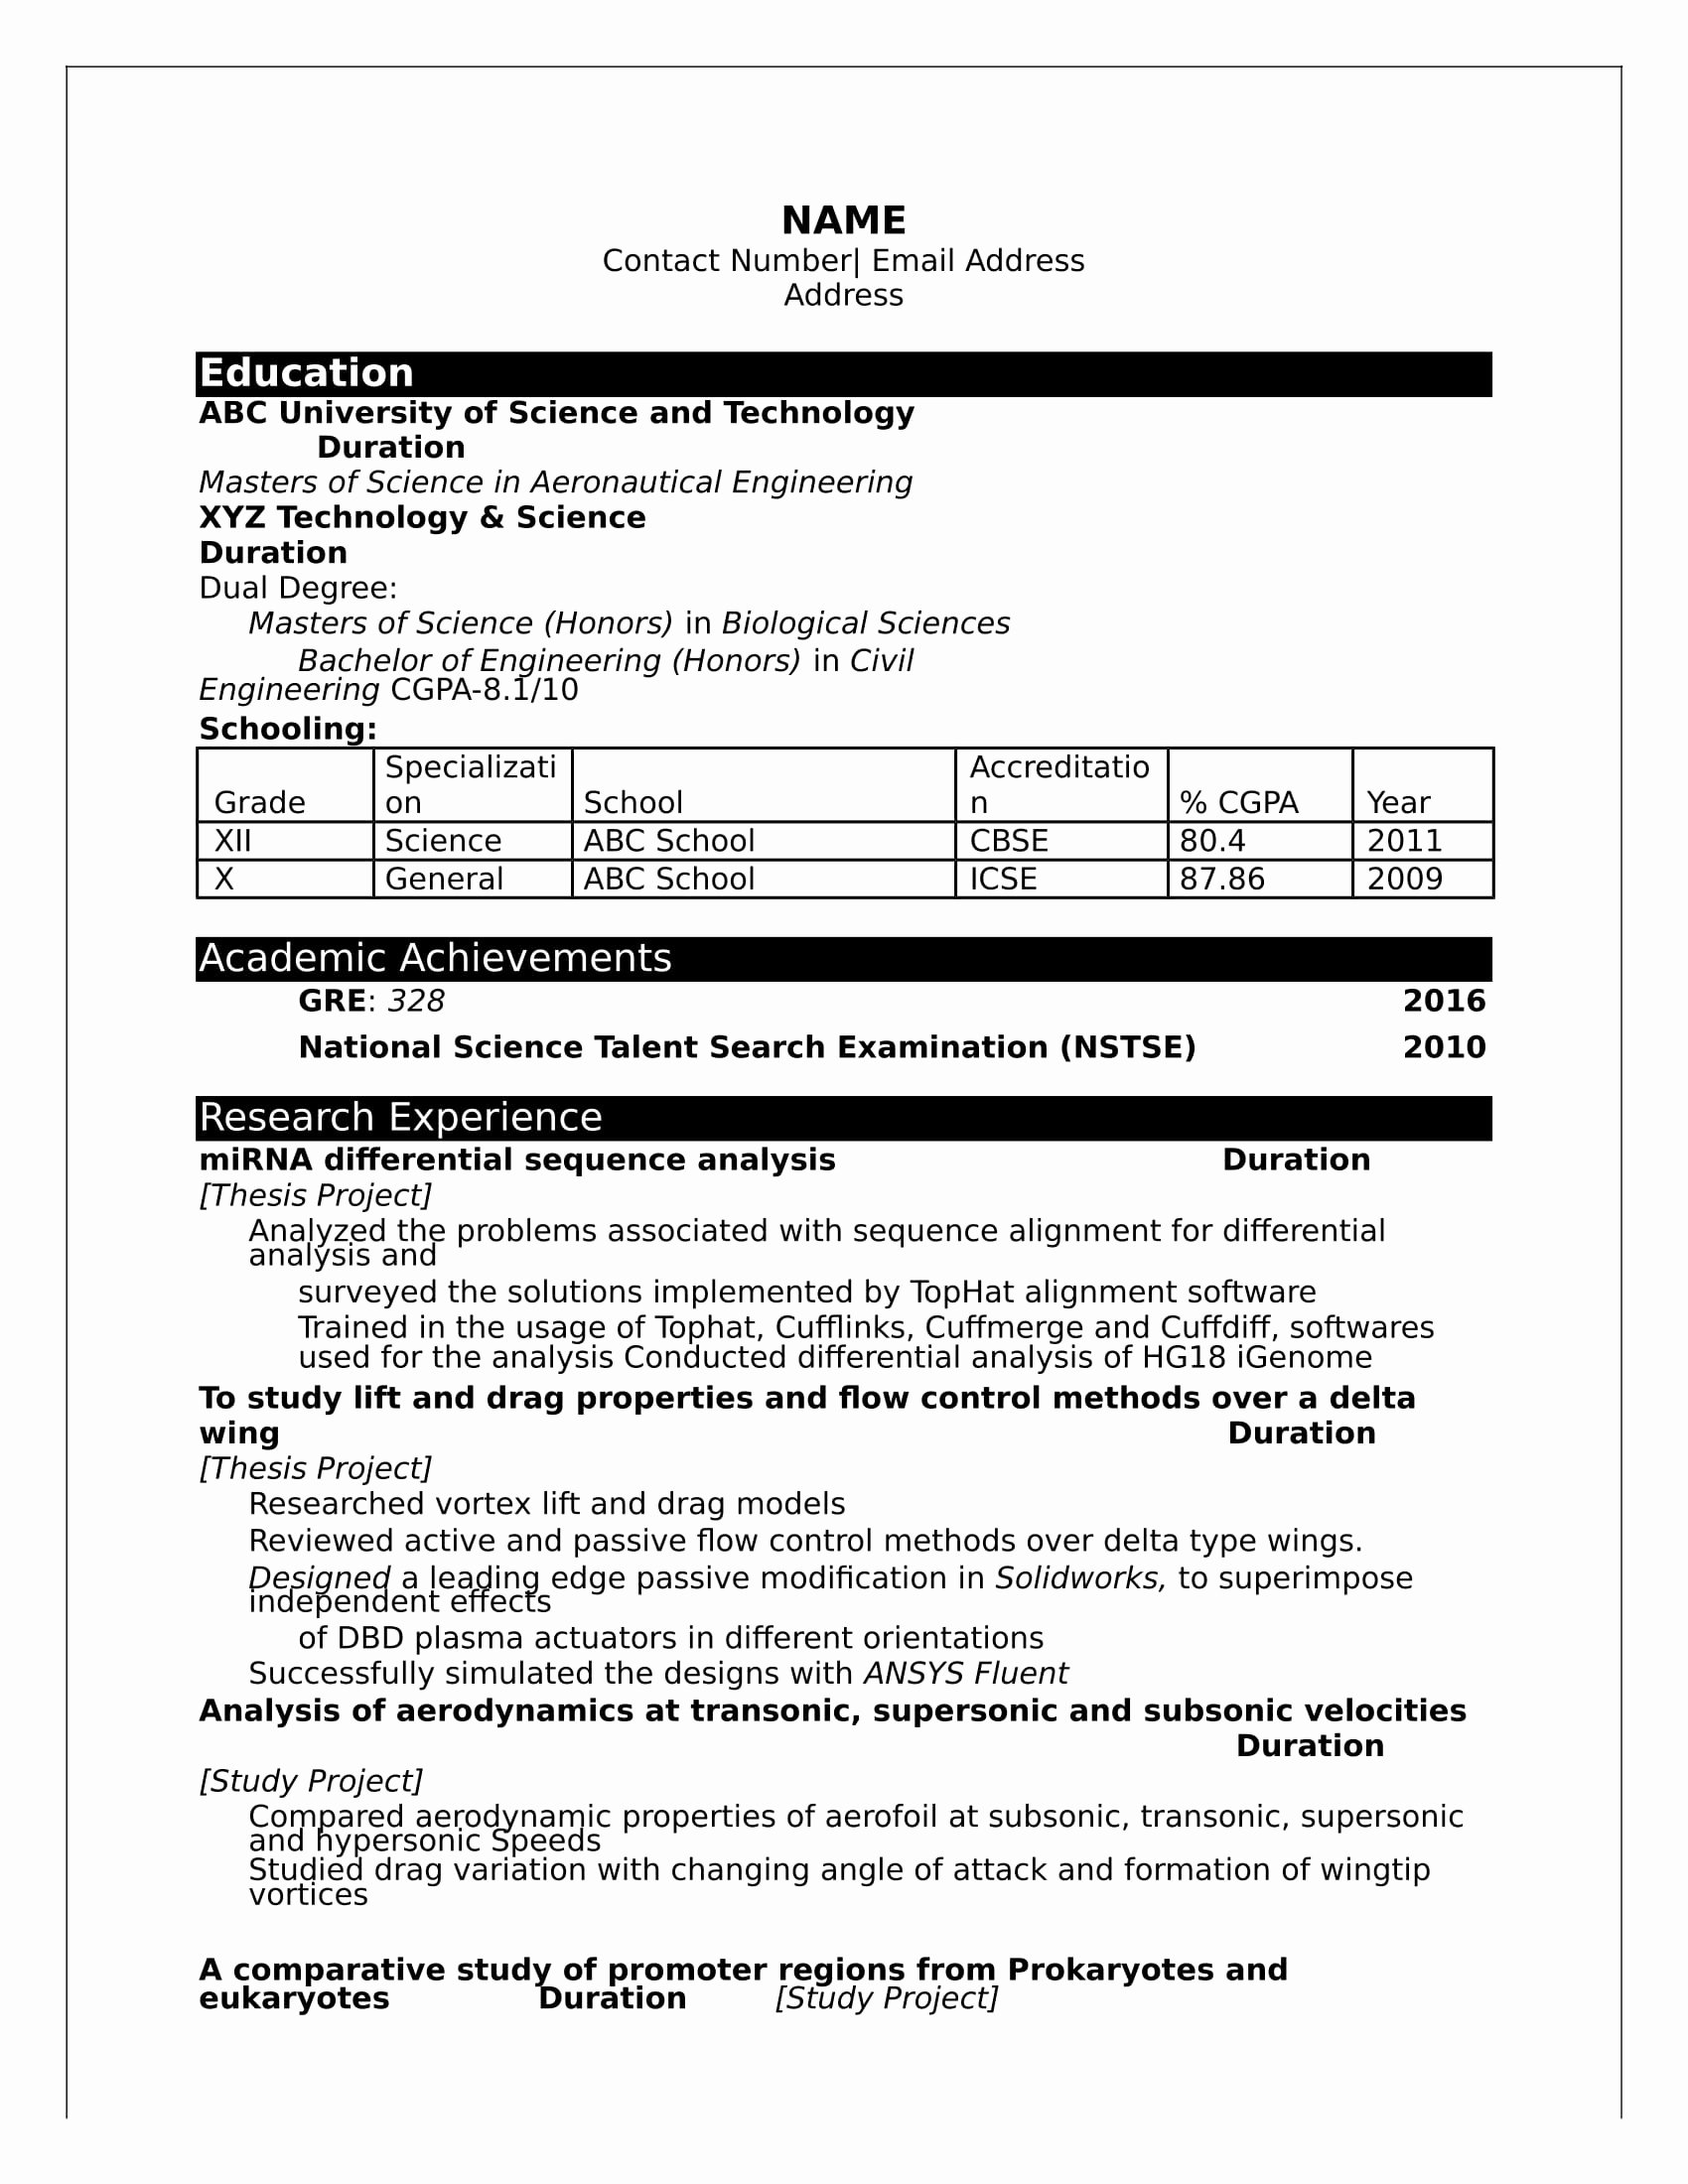 Engineer Resume Template Word Awesome 32 Resume Templates for Freshers Download Free Word format